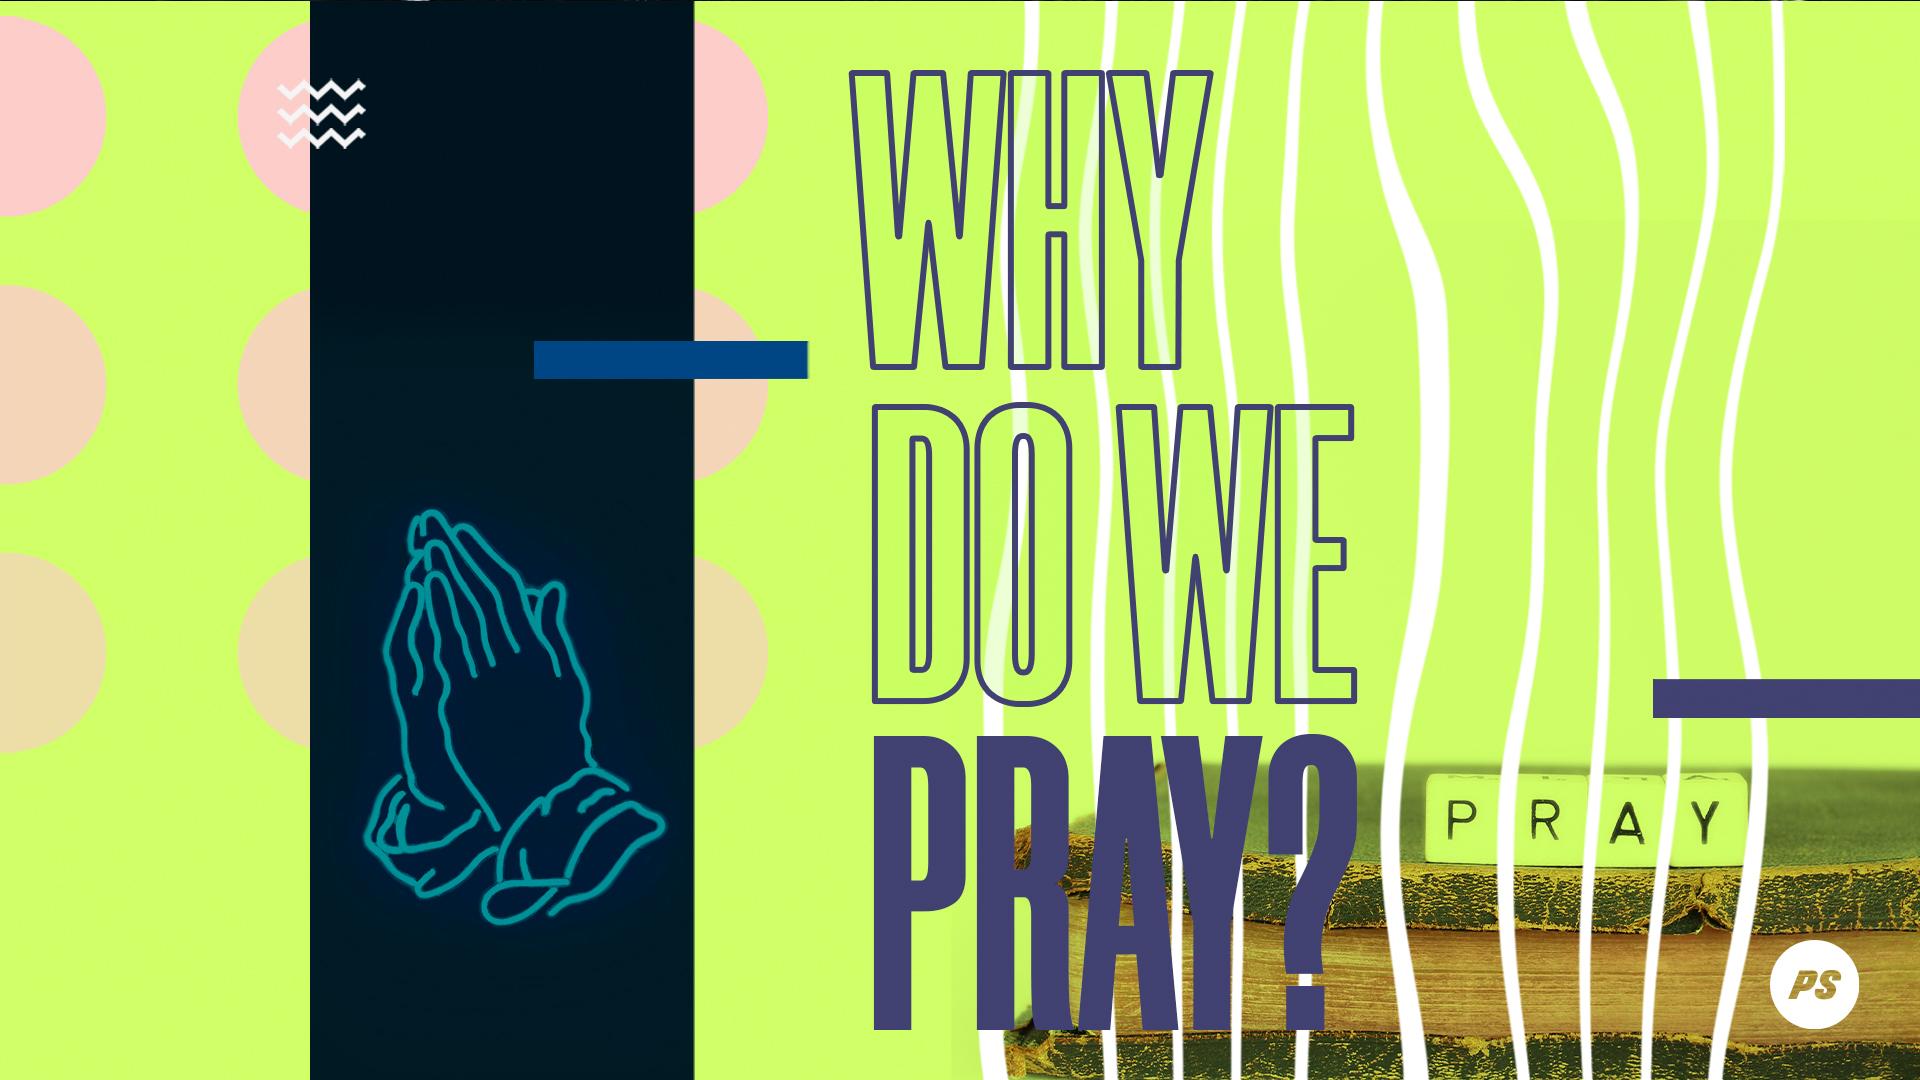 Featured image for “Why do we pray?”